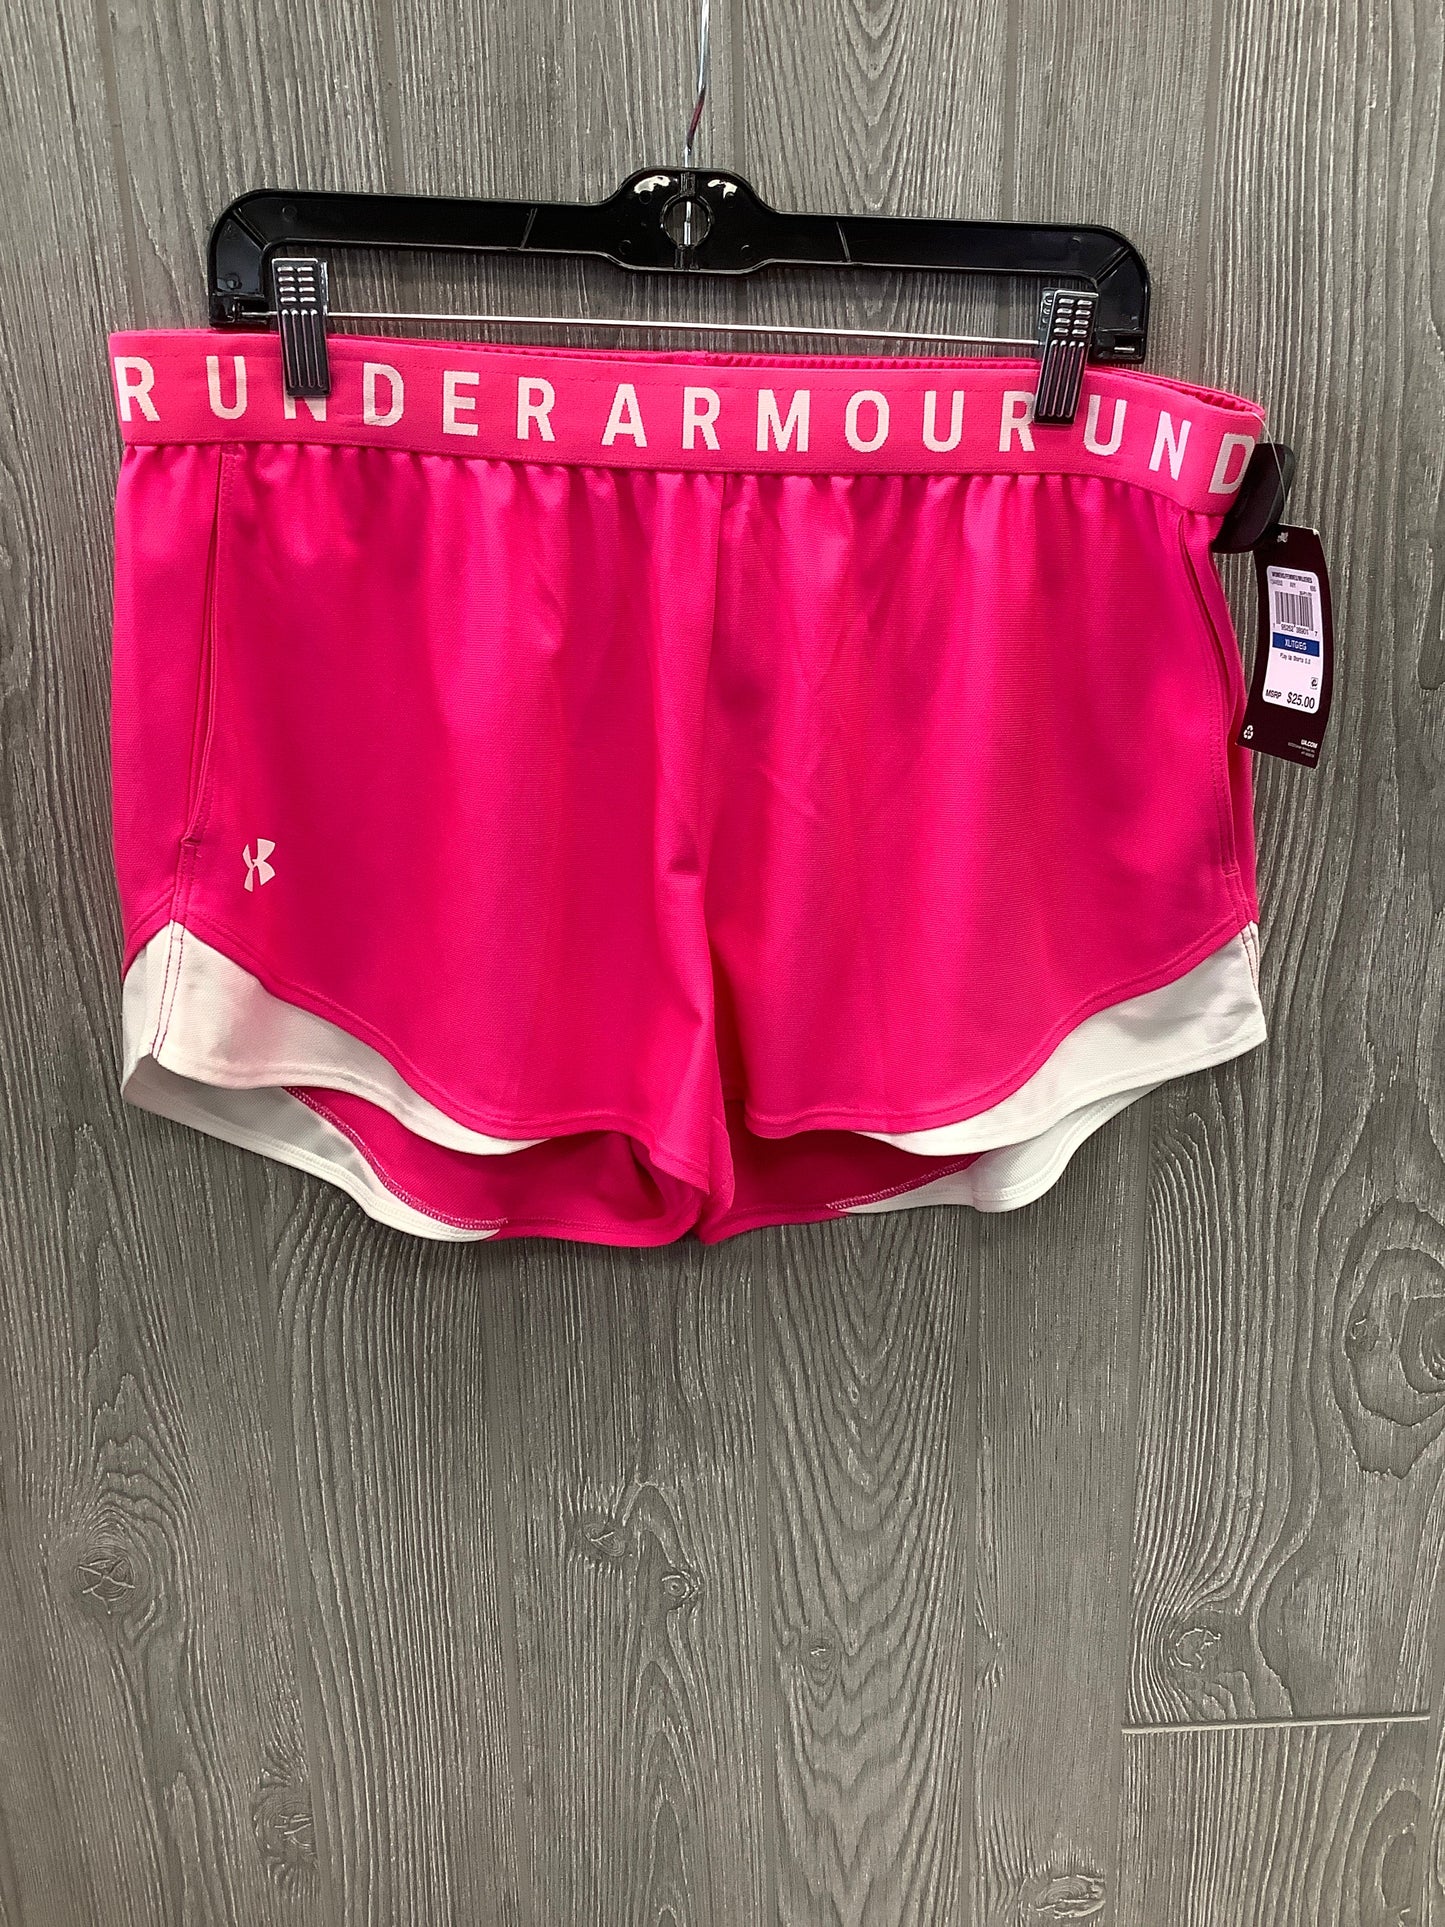 Pink Athletic Shorts Under Armour, Size Xl